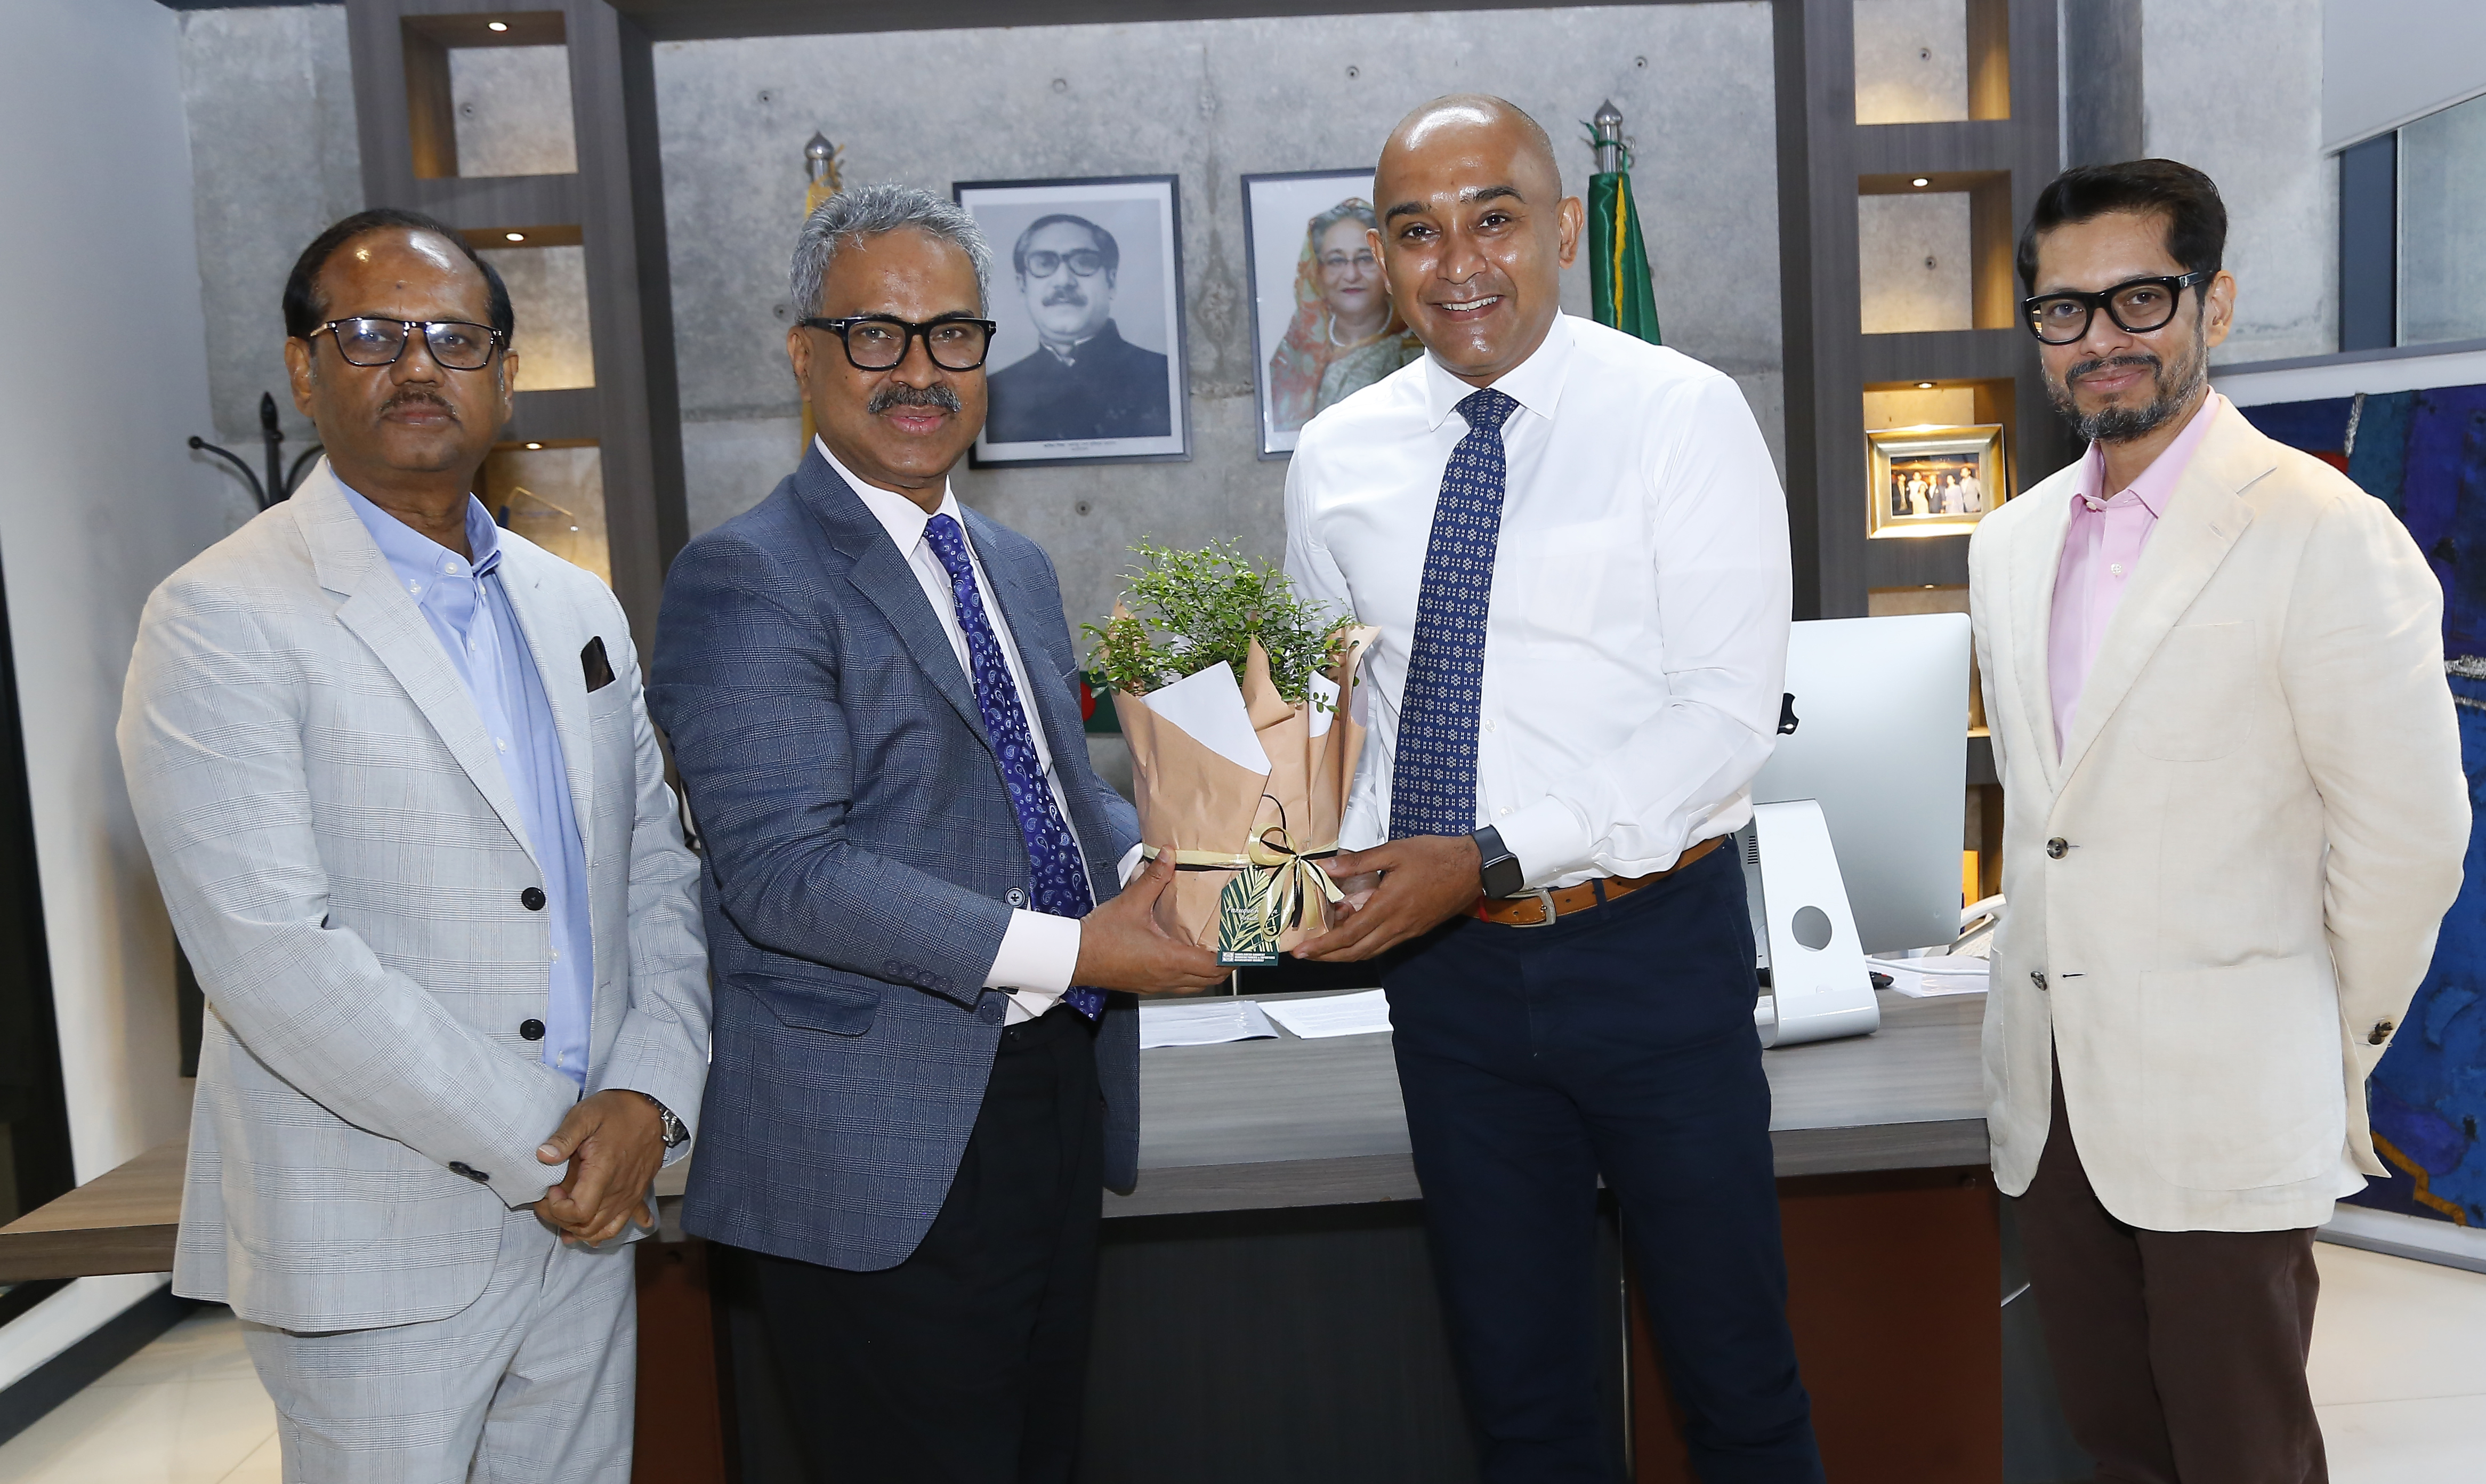 Resident Representative (Asia and Pacific Department) of International Monetary Fund (IMF), Jayendu De, paid a courtesy visit to BGMEA President Faruque Hassan and expressed the willingness of IMF to support the development activities in the apparel secto